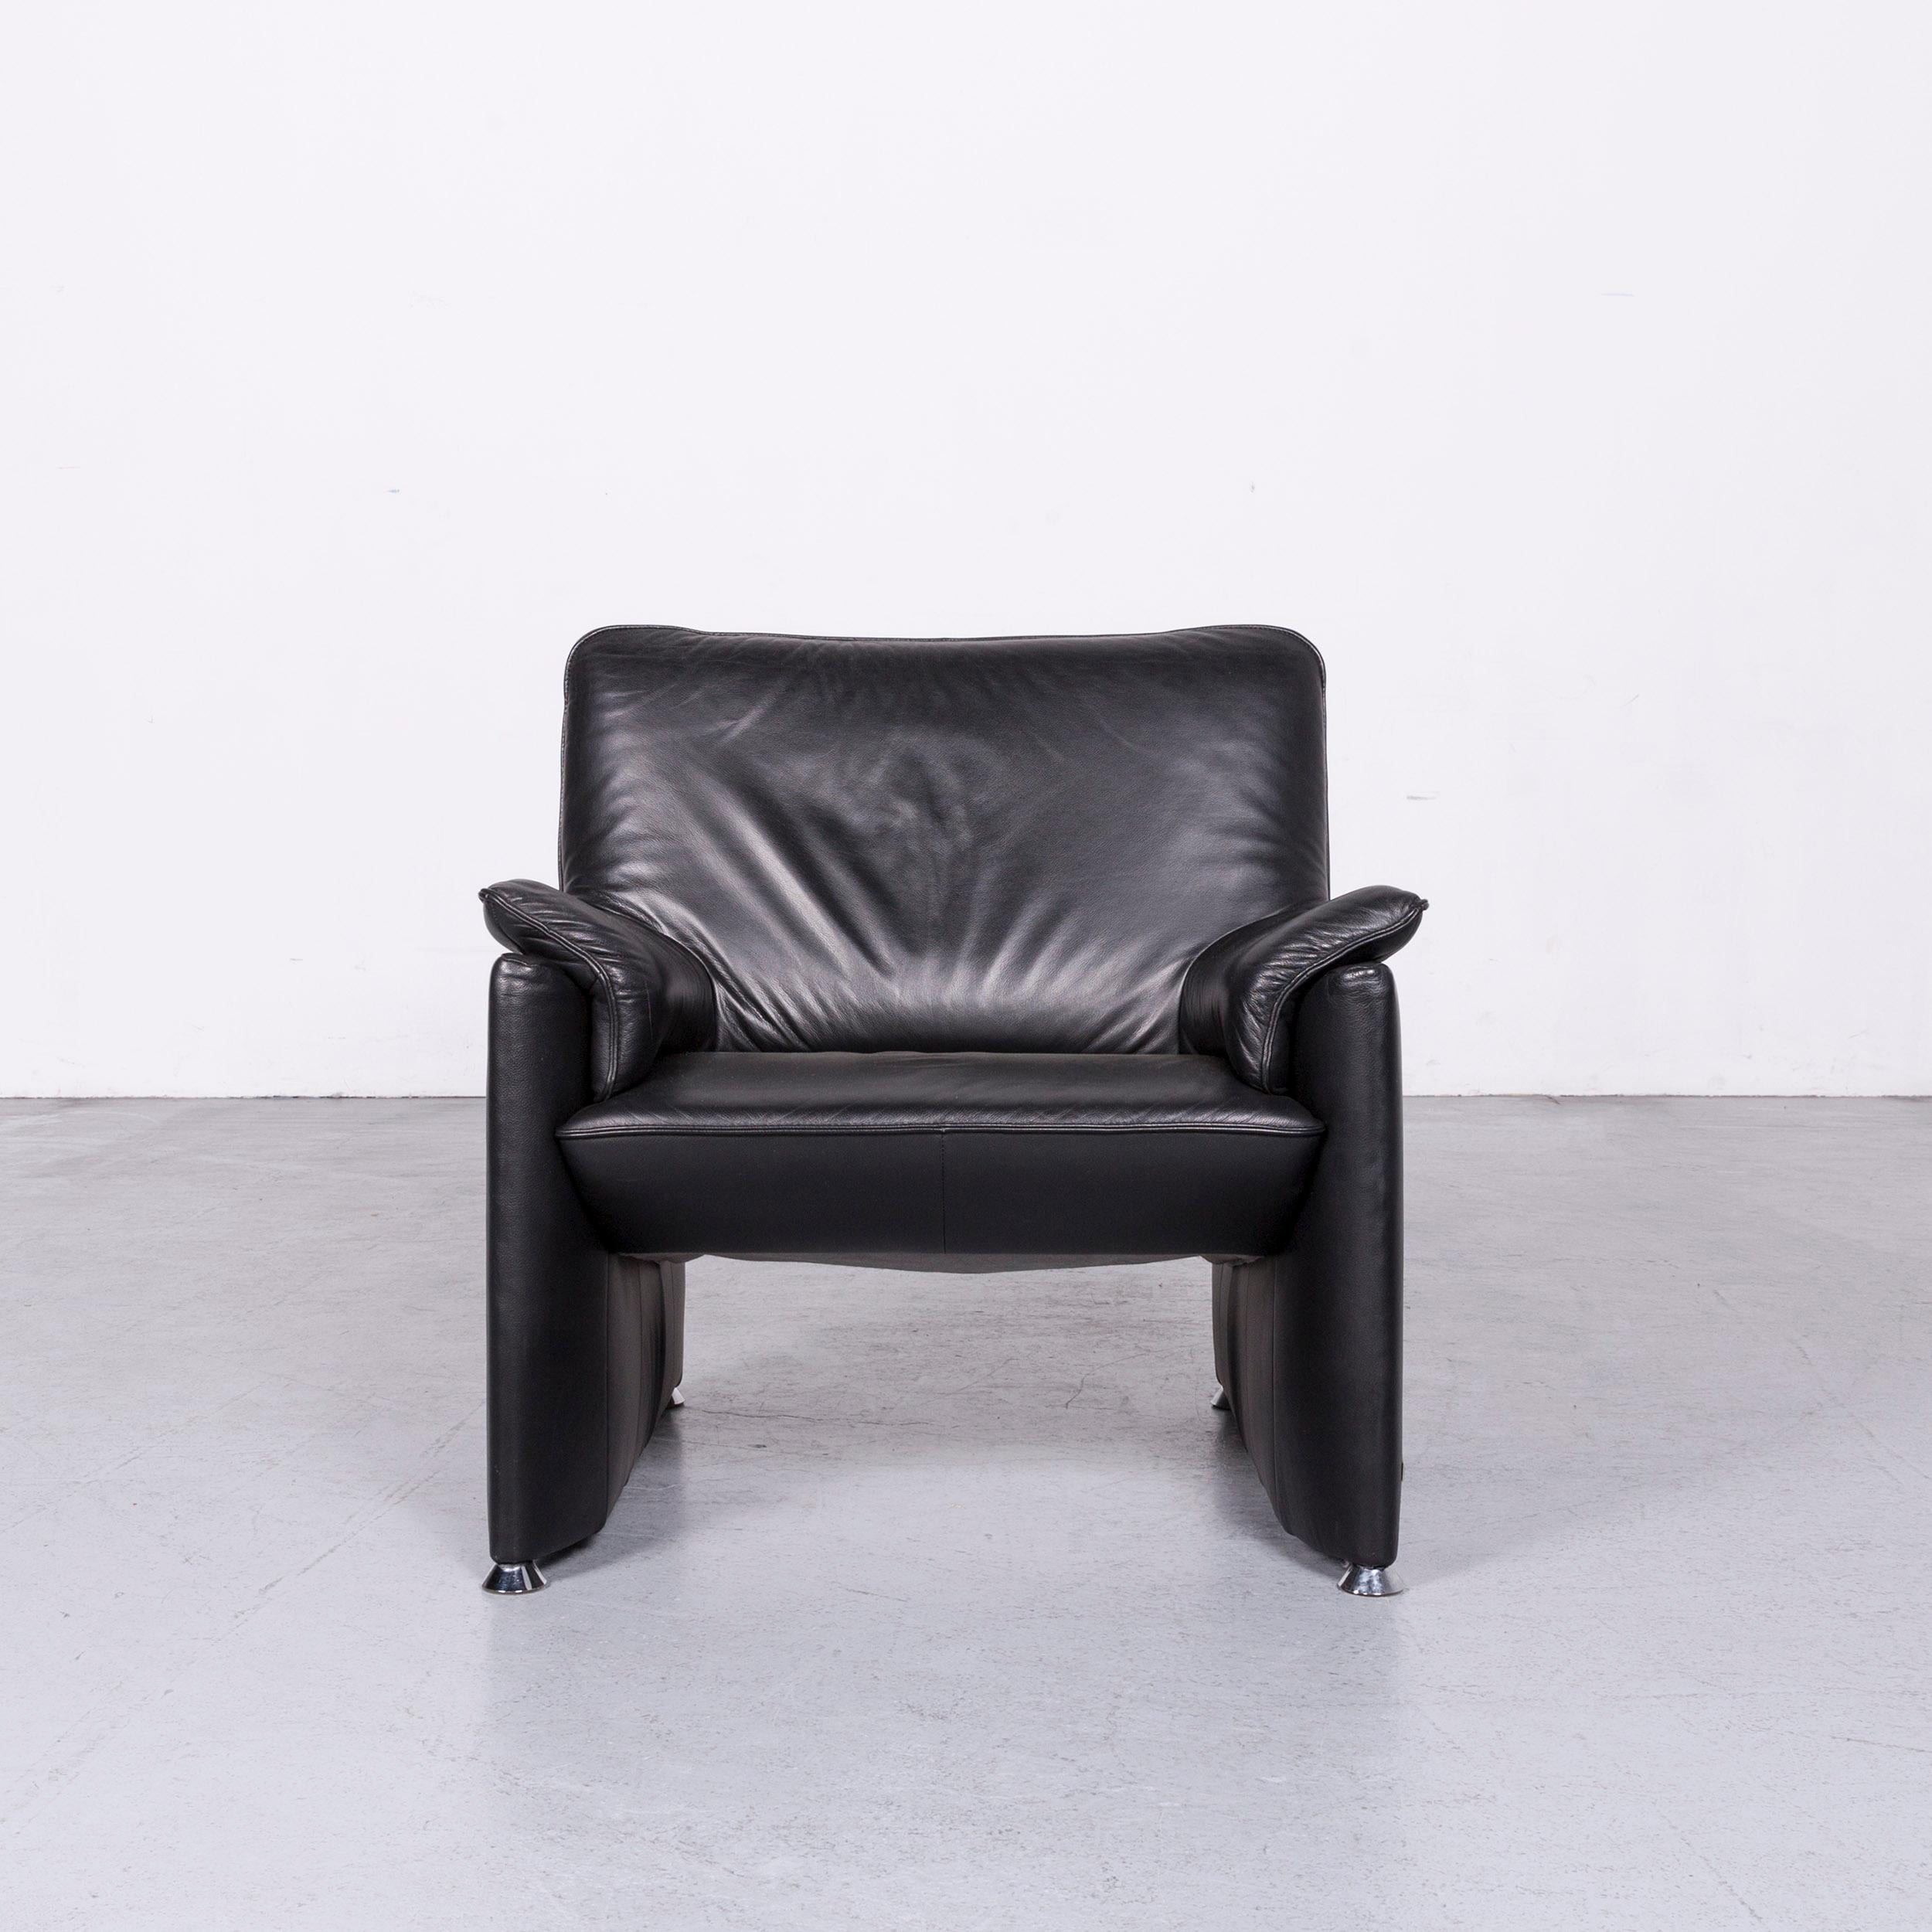 We bring to you a Laauser flair designer leather armchair black one-seat couch.